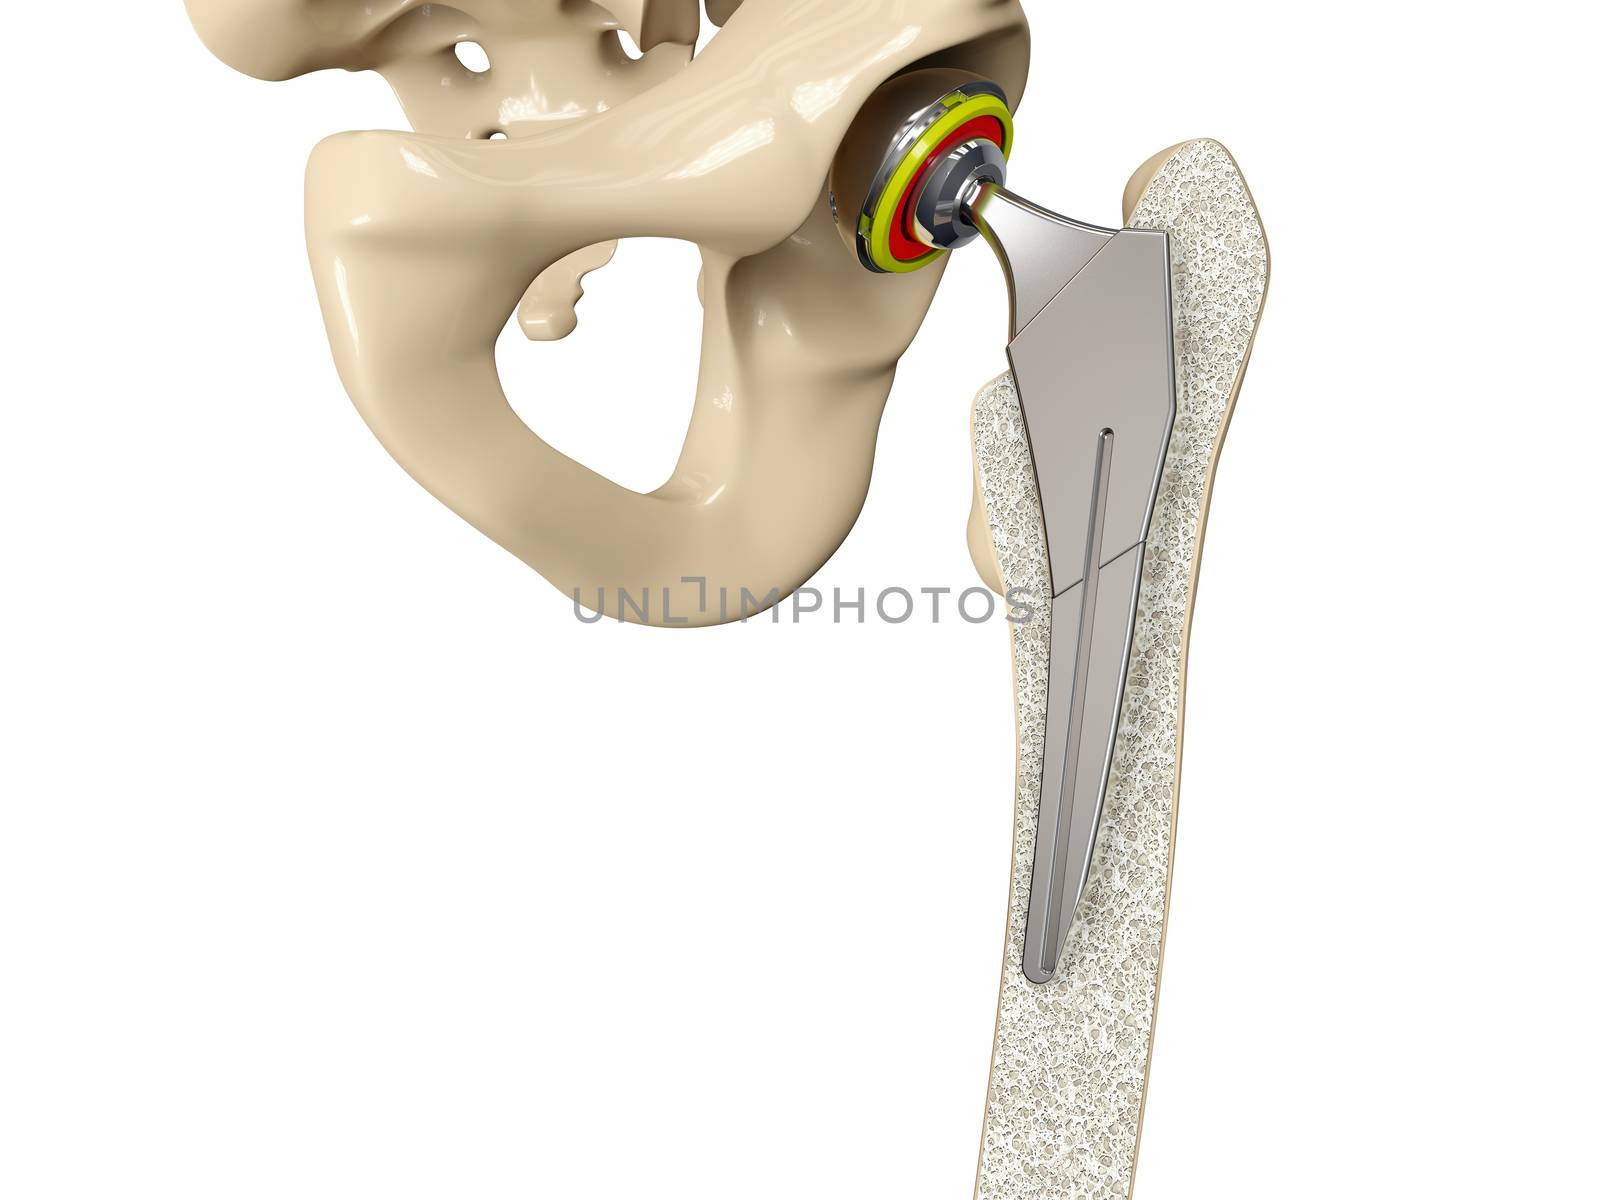 3D illustration of Hip replacement implant installed in the pelvis bone by tussik